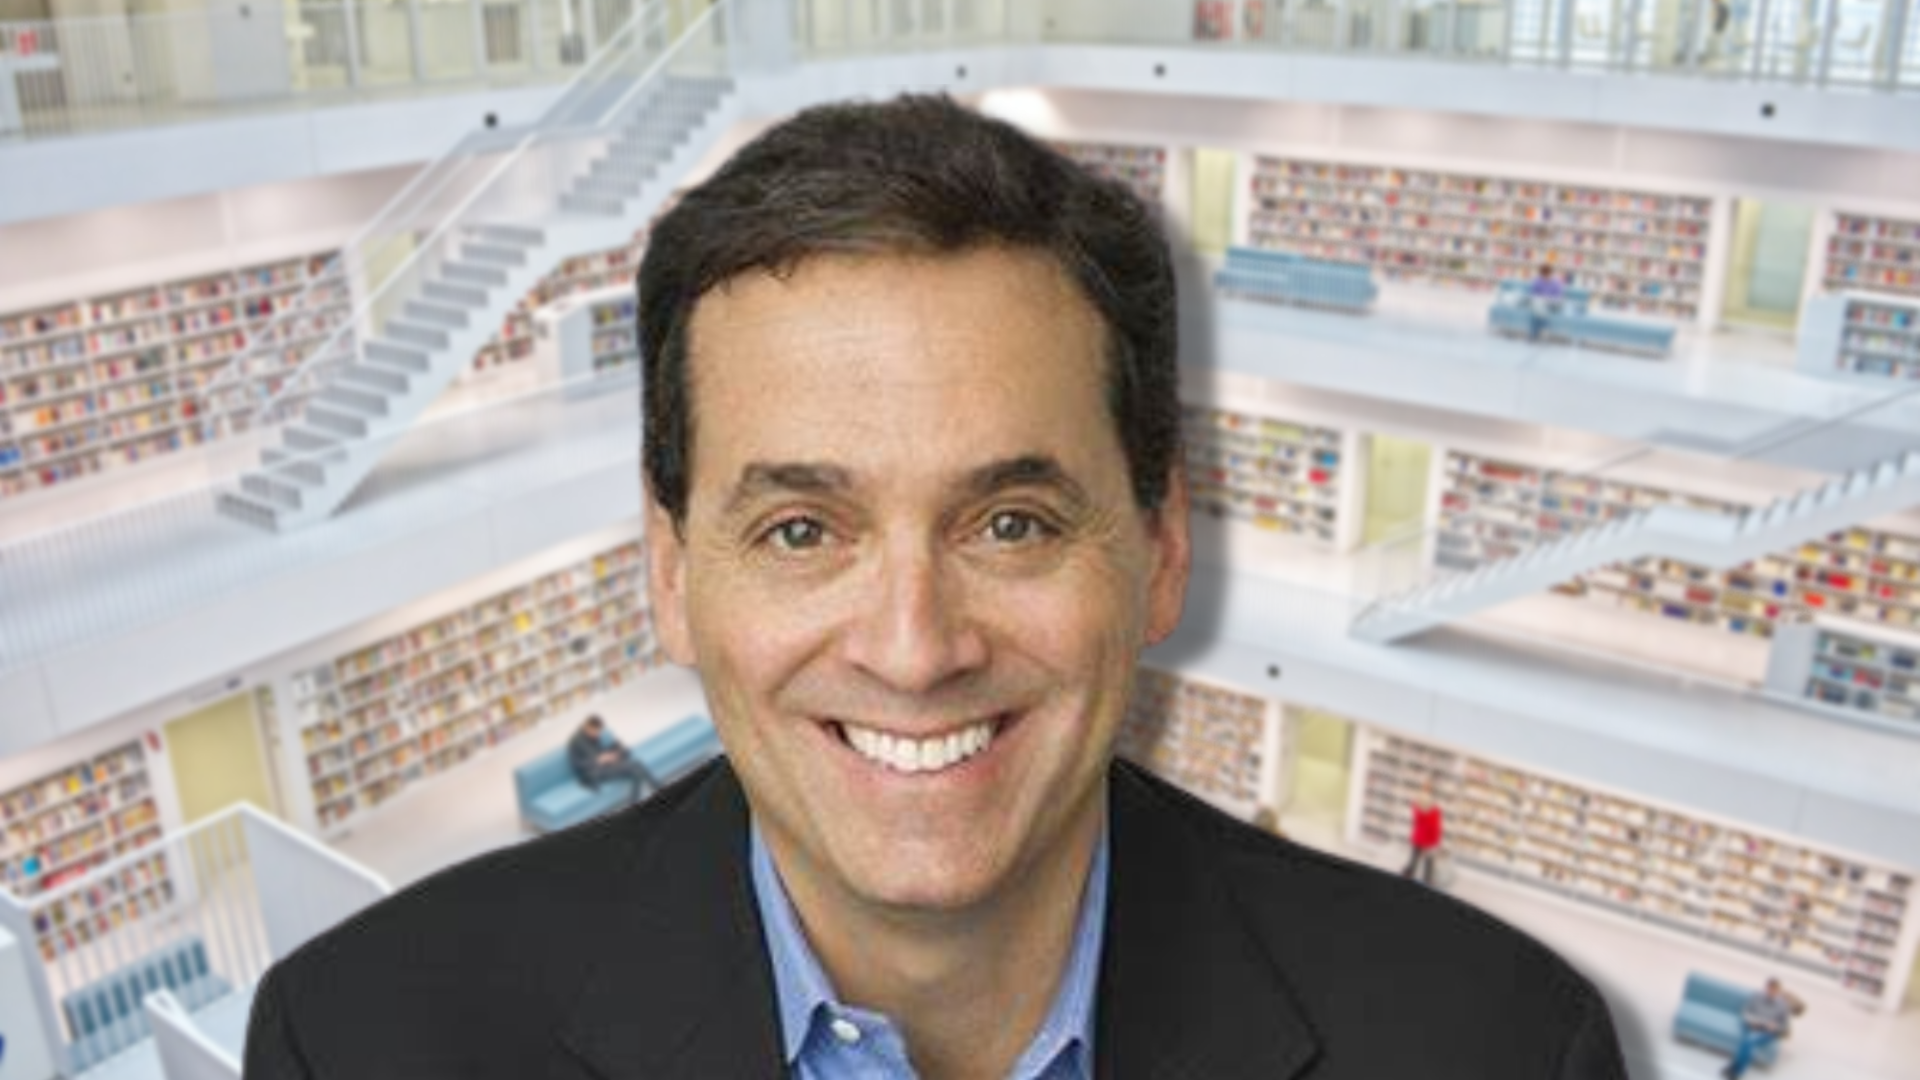 The Power of Regret, by Daniel Pink